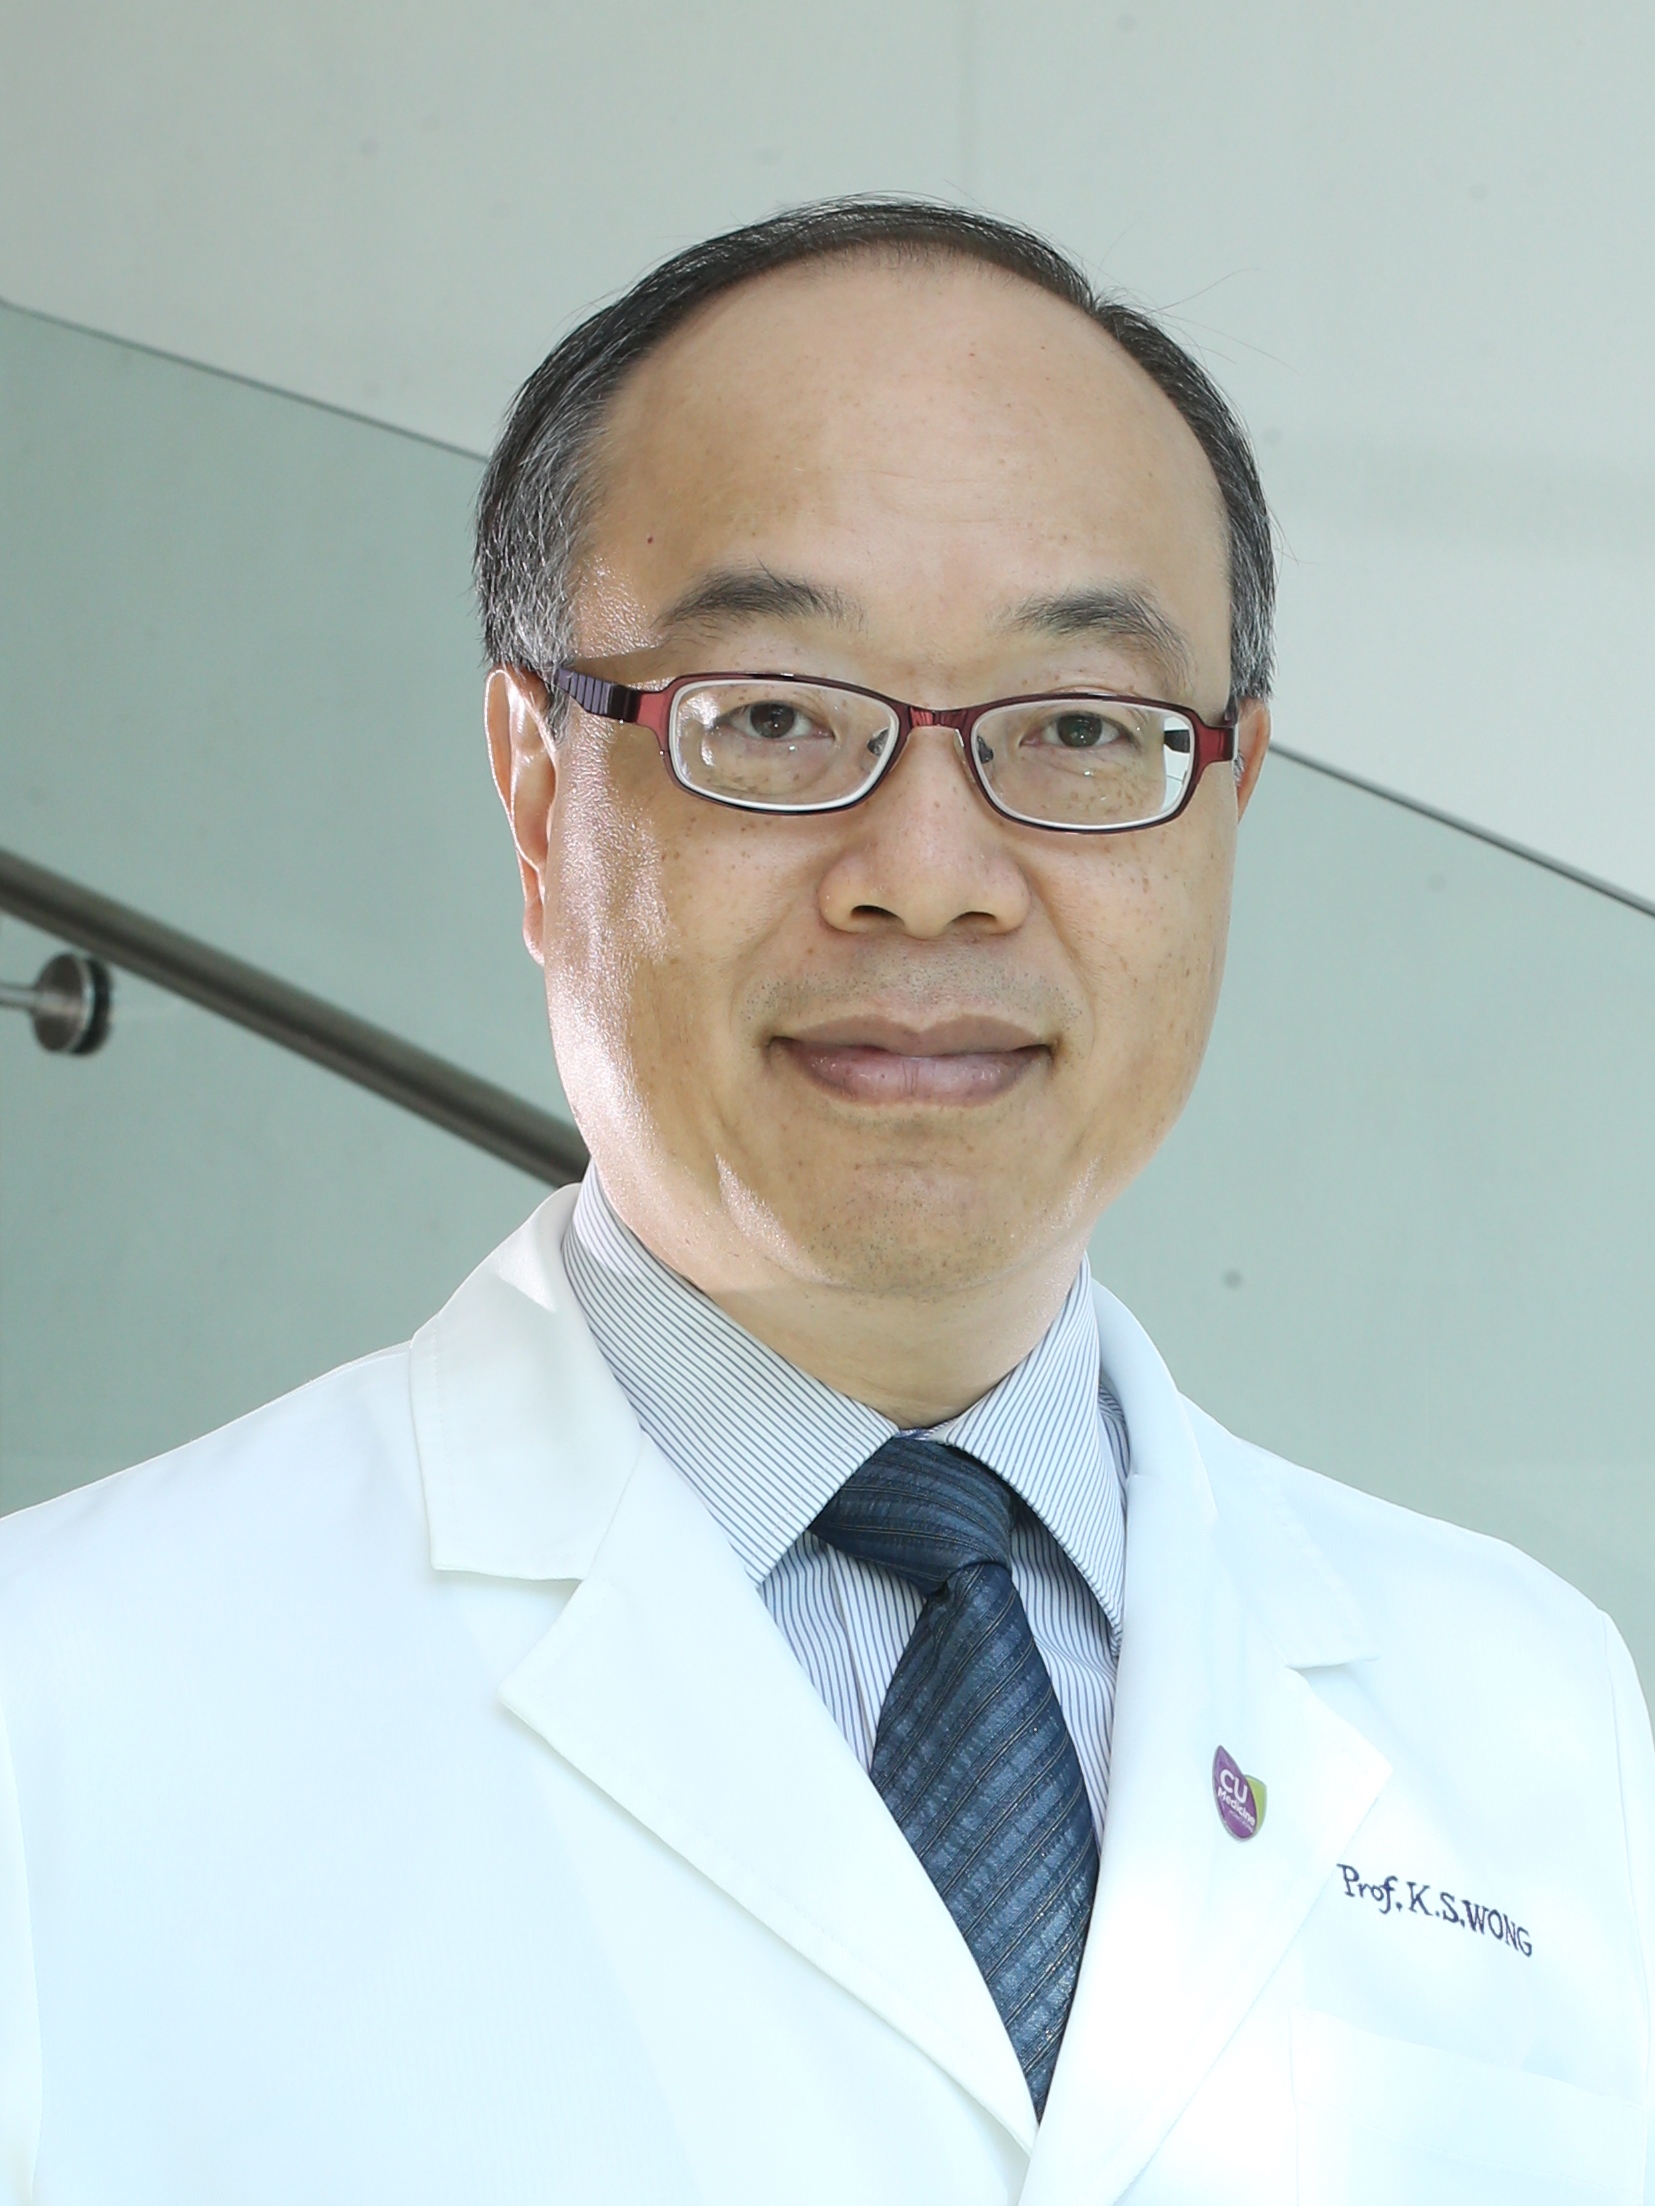 Prof. Lawrence WONG, Clinical Professor (honorary) of the Department of Medicine and Therapeutics at the Faculty of Medicine at CUHK, is very encouraged about the recipient of the State Scientific and Technological Progress Award second-class award. He is also confident that the development of stroke therapy will continue to improve through researches.